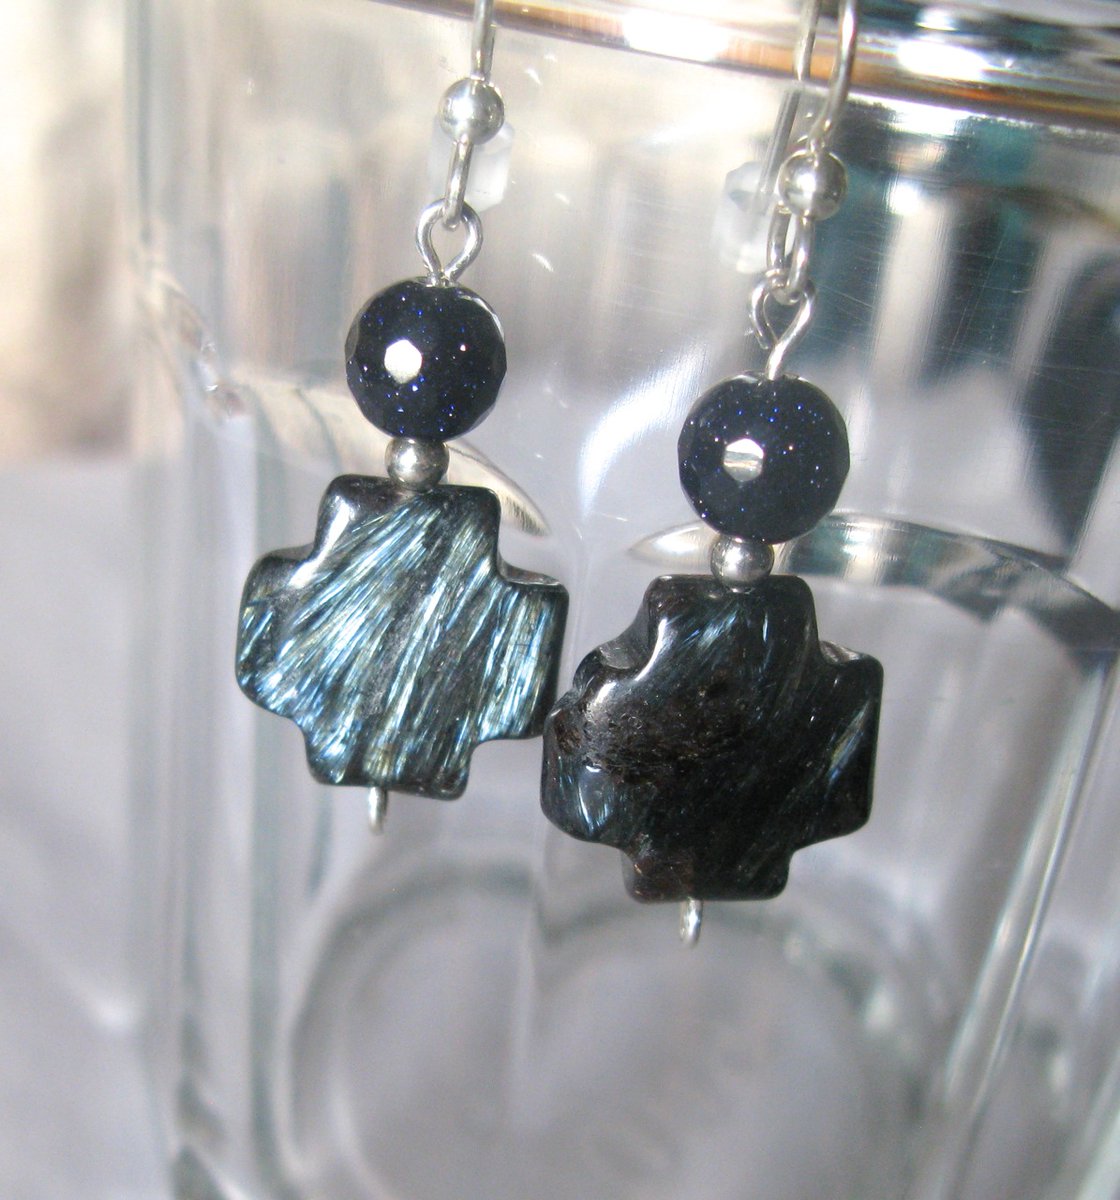 Did I show you "Mapping the Starfields" yet? That was another high point of 2019. They are sterling silver earrings combining blue goldstone glass and what I thought was blue astrophyllite. Turns out it's probably actually arfvedsonite. Fascinating stuff, whatever it is.